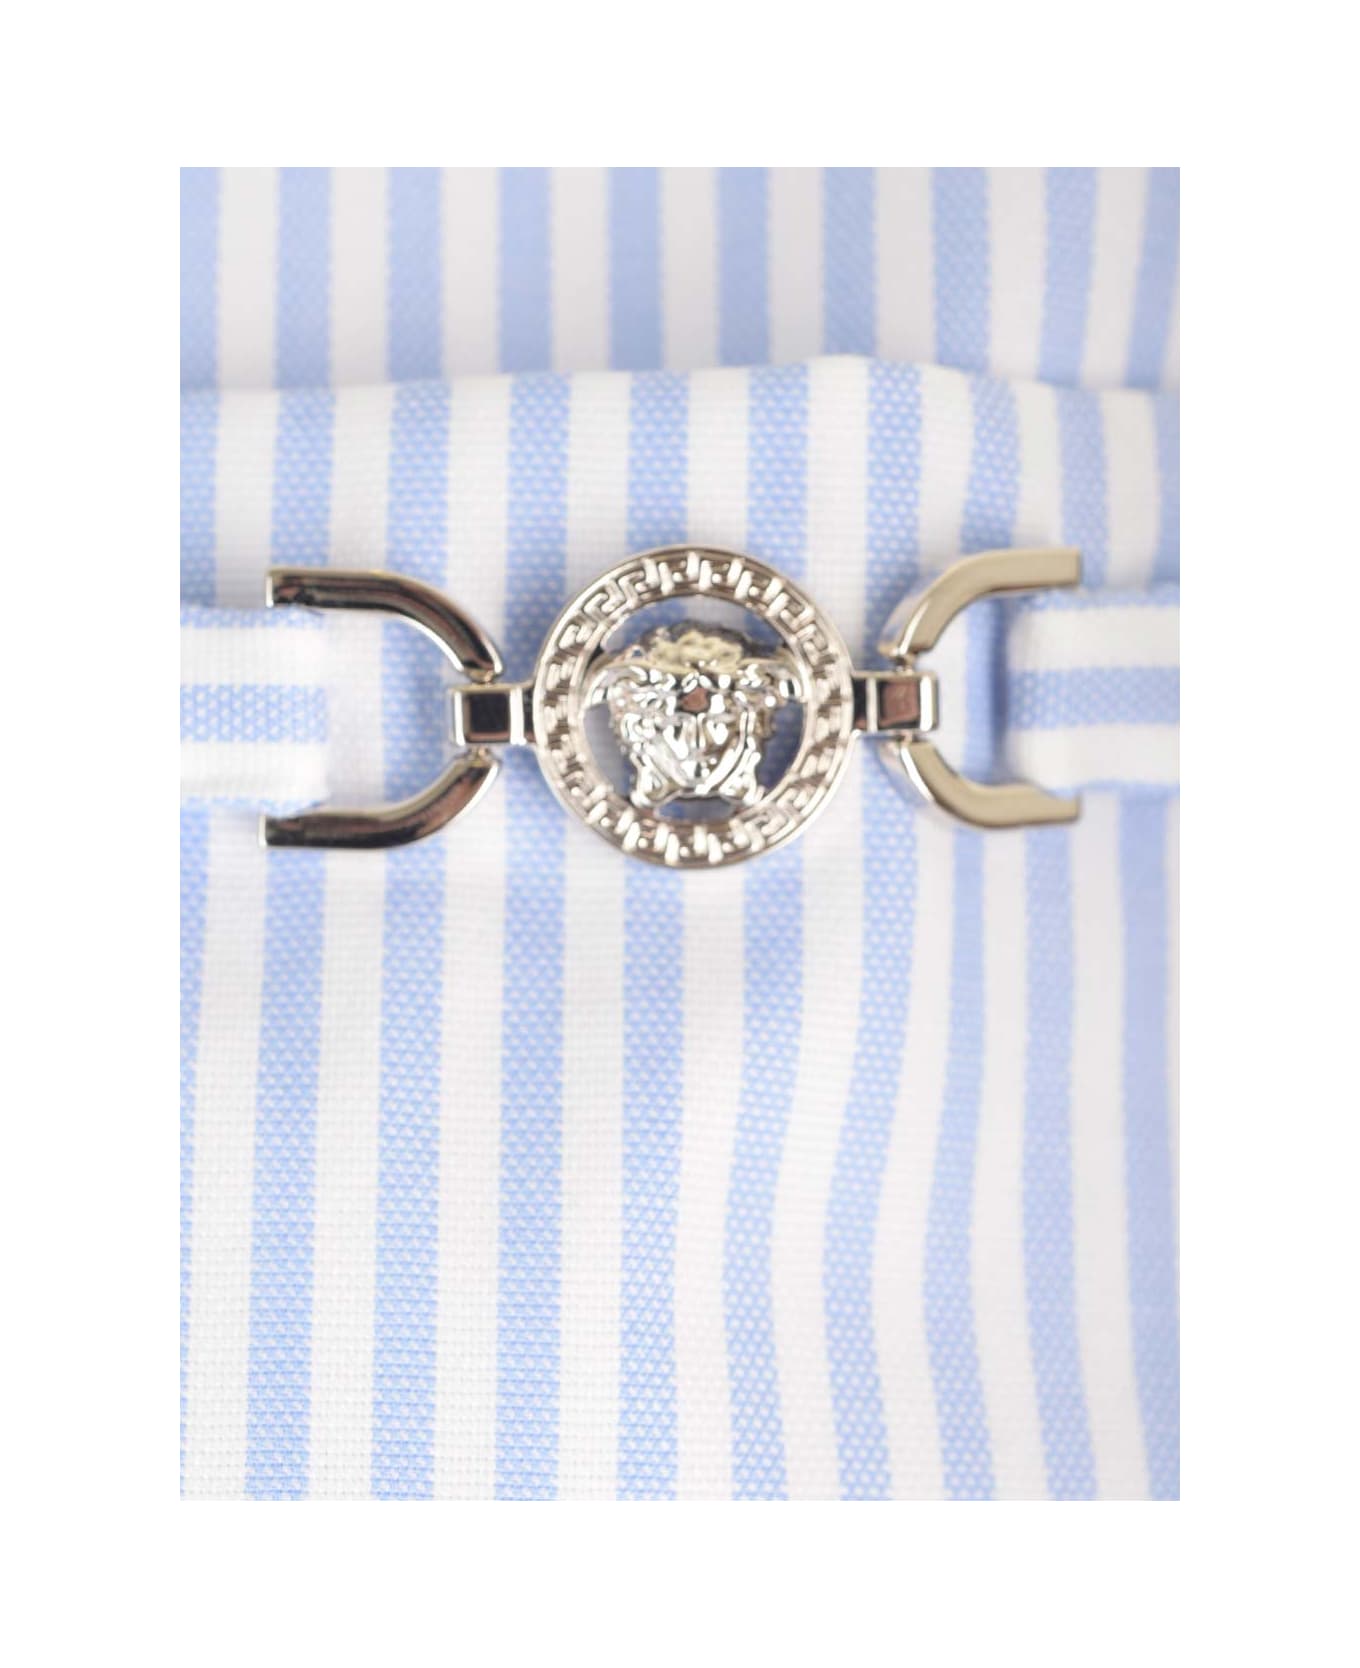 Versace Cropped Shirt - BLUE/WHITE